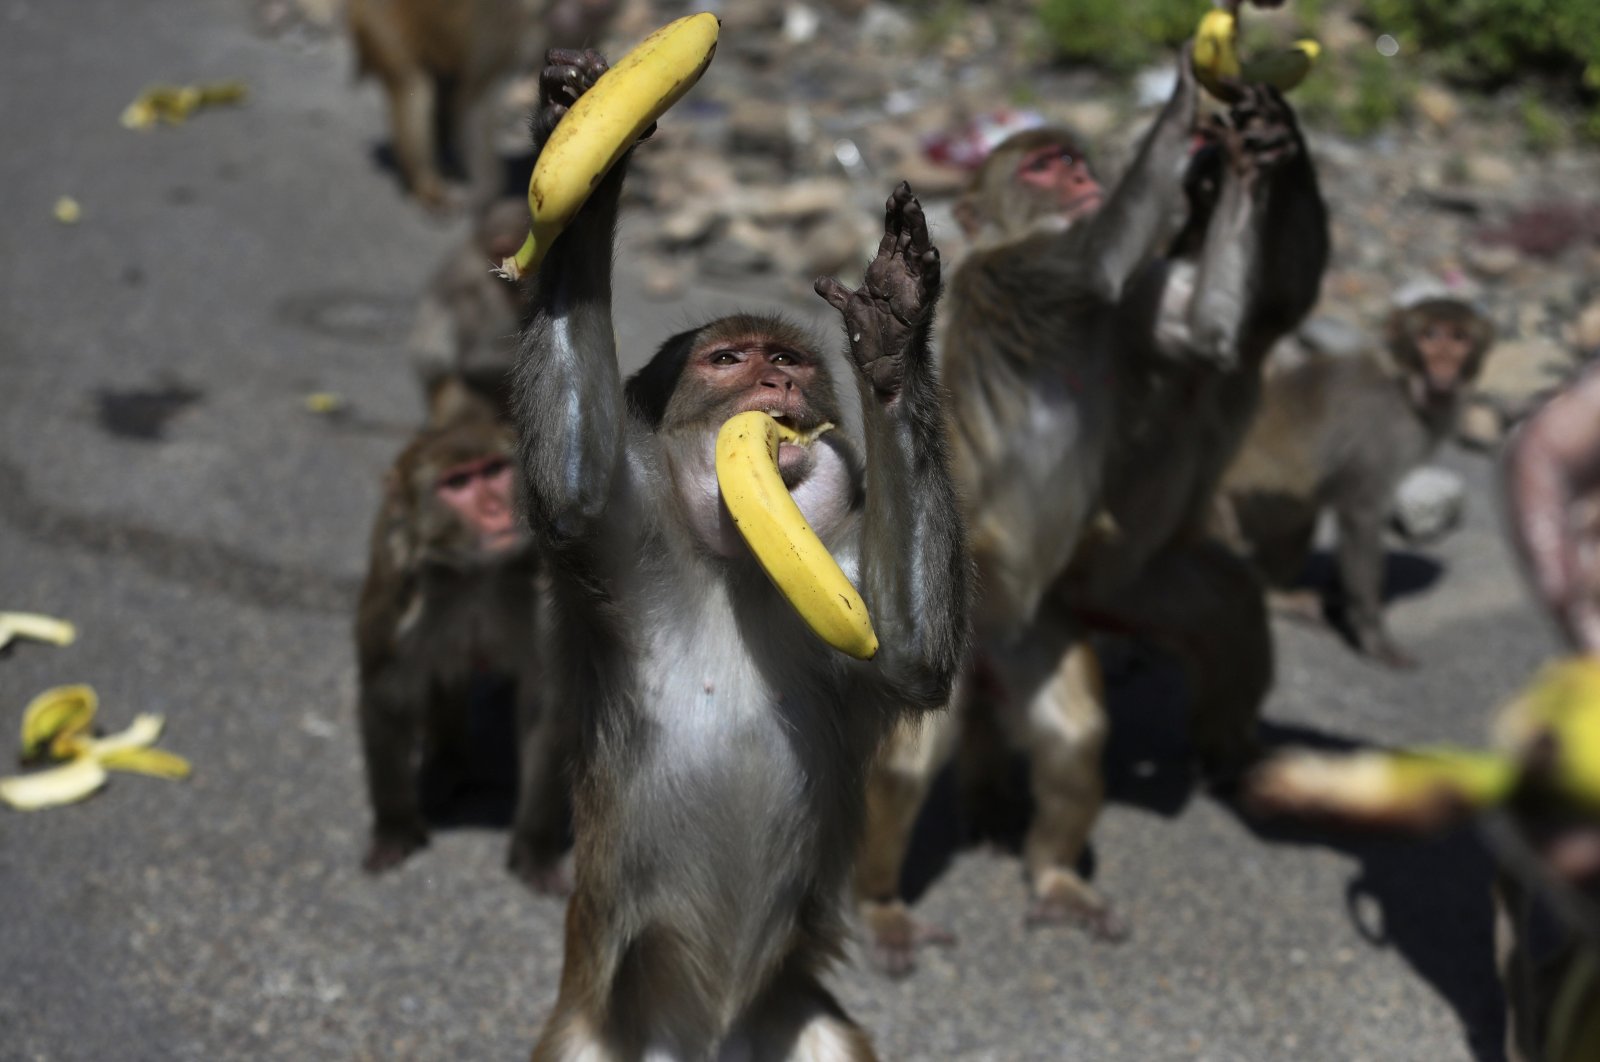 A monkey reaches out to grab bananas as a man feeds a group of monkeys during lockdown to prevent the spread of new coronavirus in Jammu, India, Wednesday, April 8, 2020. (AP Photo)